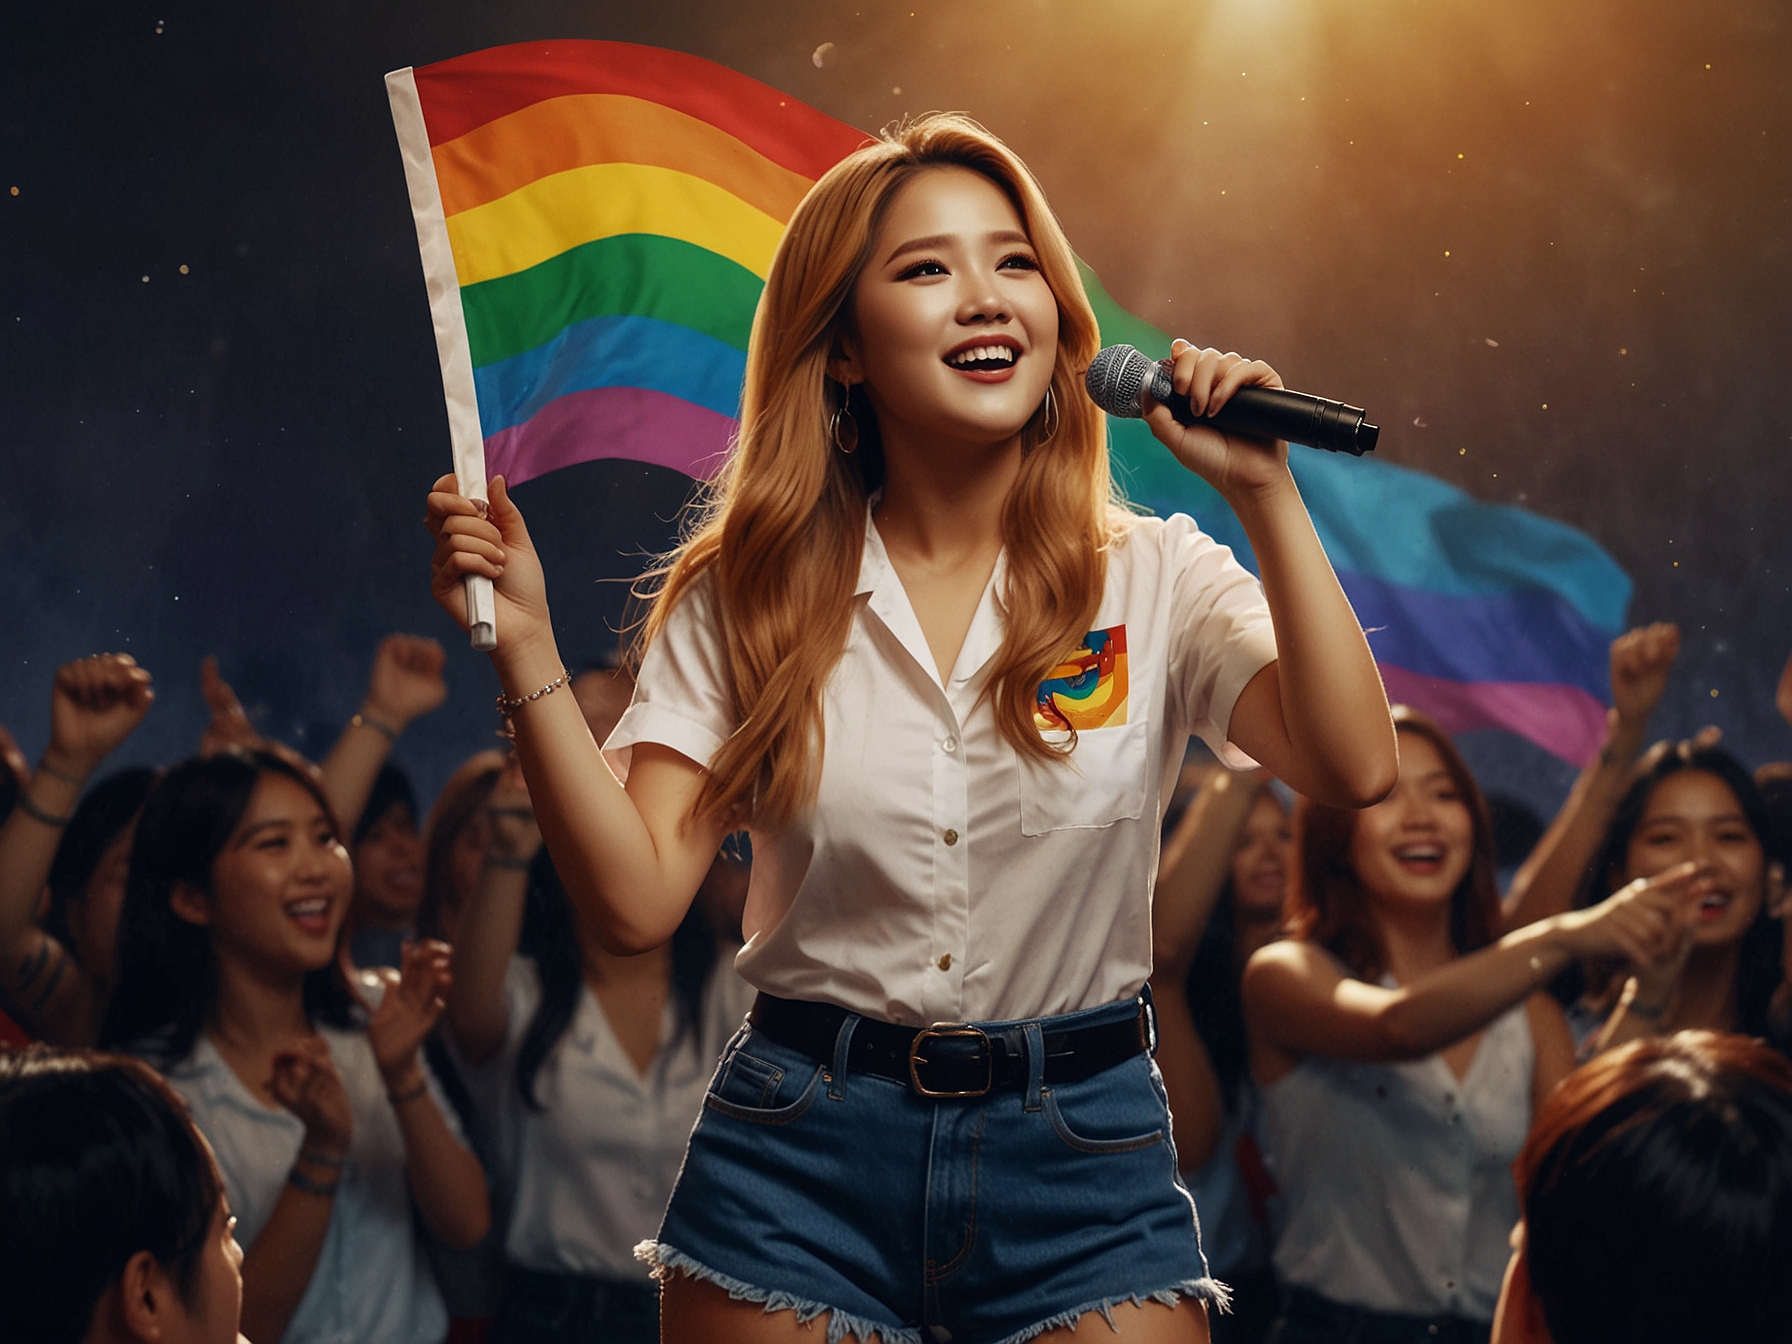 Mamamoo’s Solar performing a powerful rendition of 'Pantropiko' while holding a rainbow flag, captivating both her fans and the members of BINI during her concert in Parañaque.